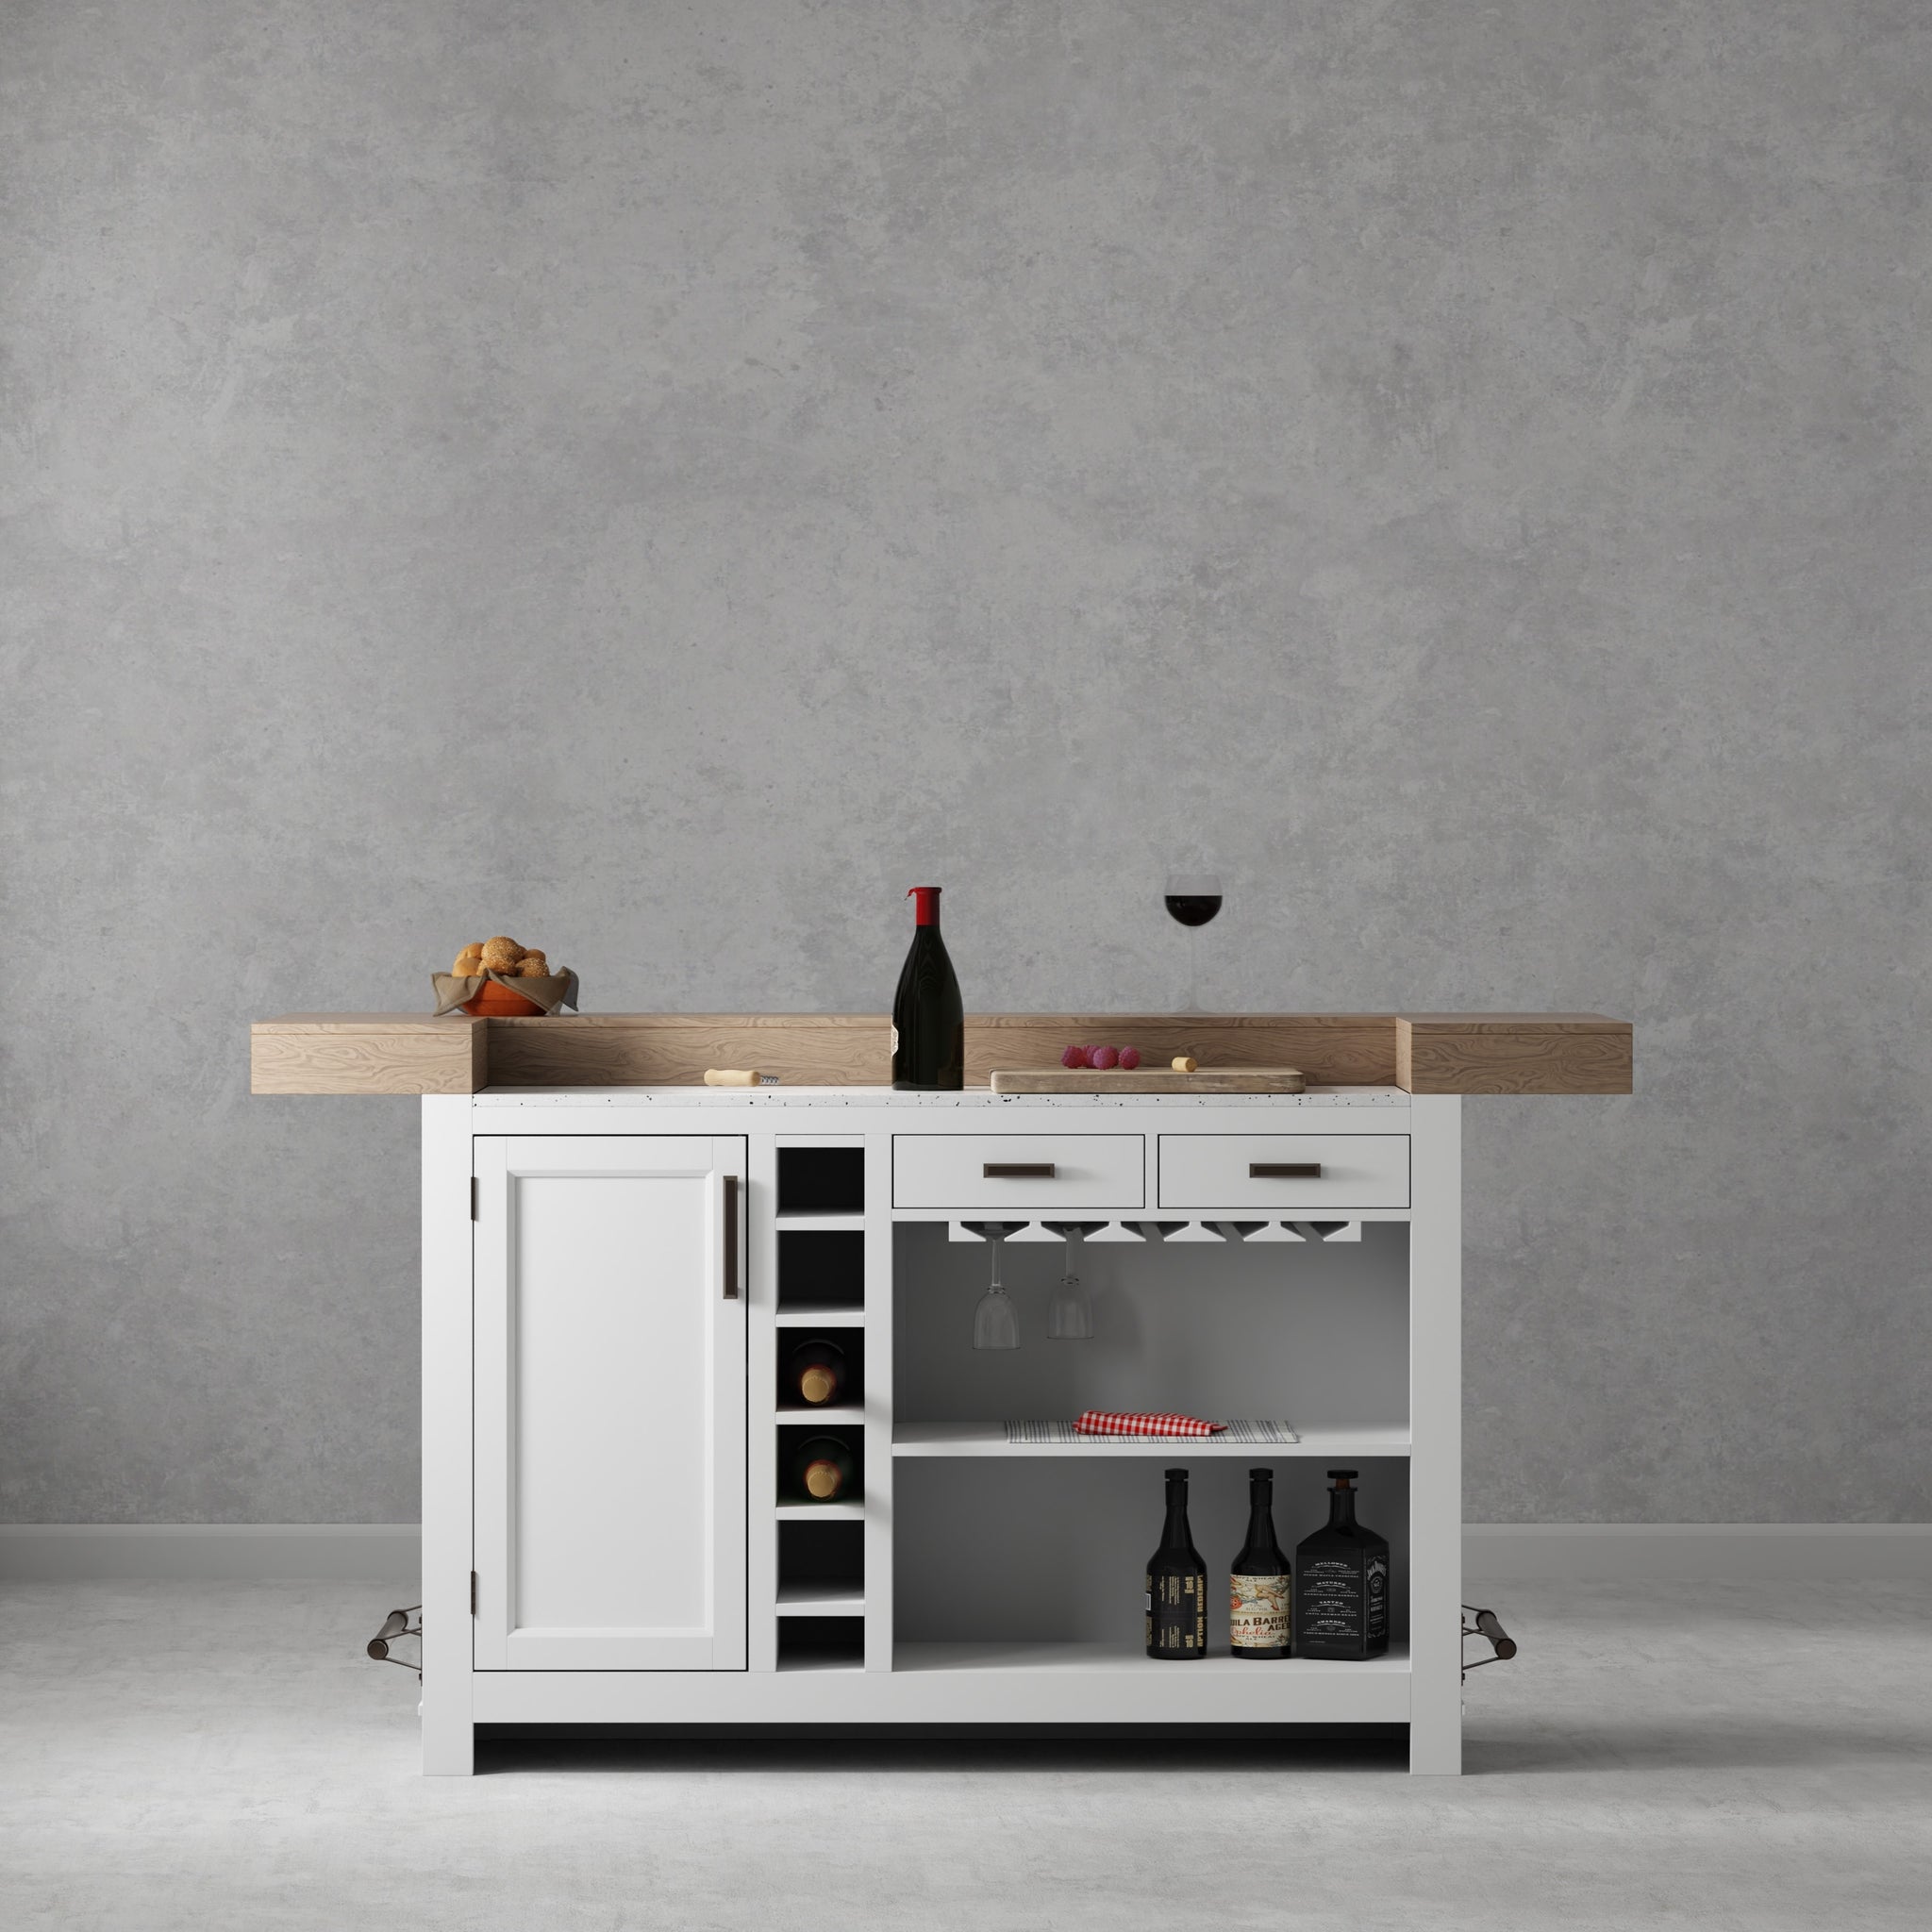 House Furniture in. DINING AMERICANA Bar 78 with quartz Parker Complete - MODERN